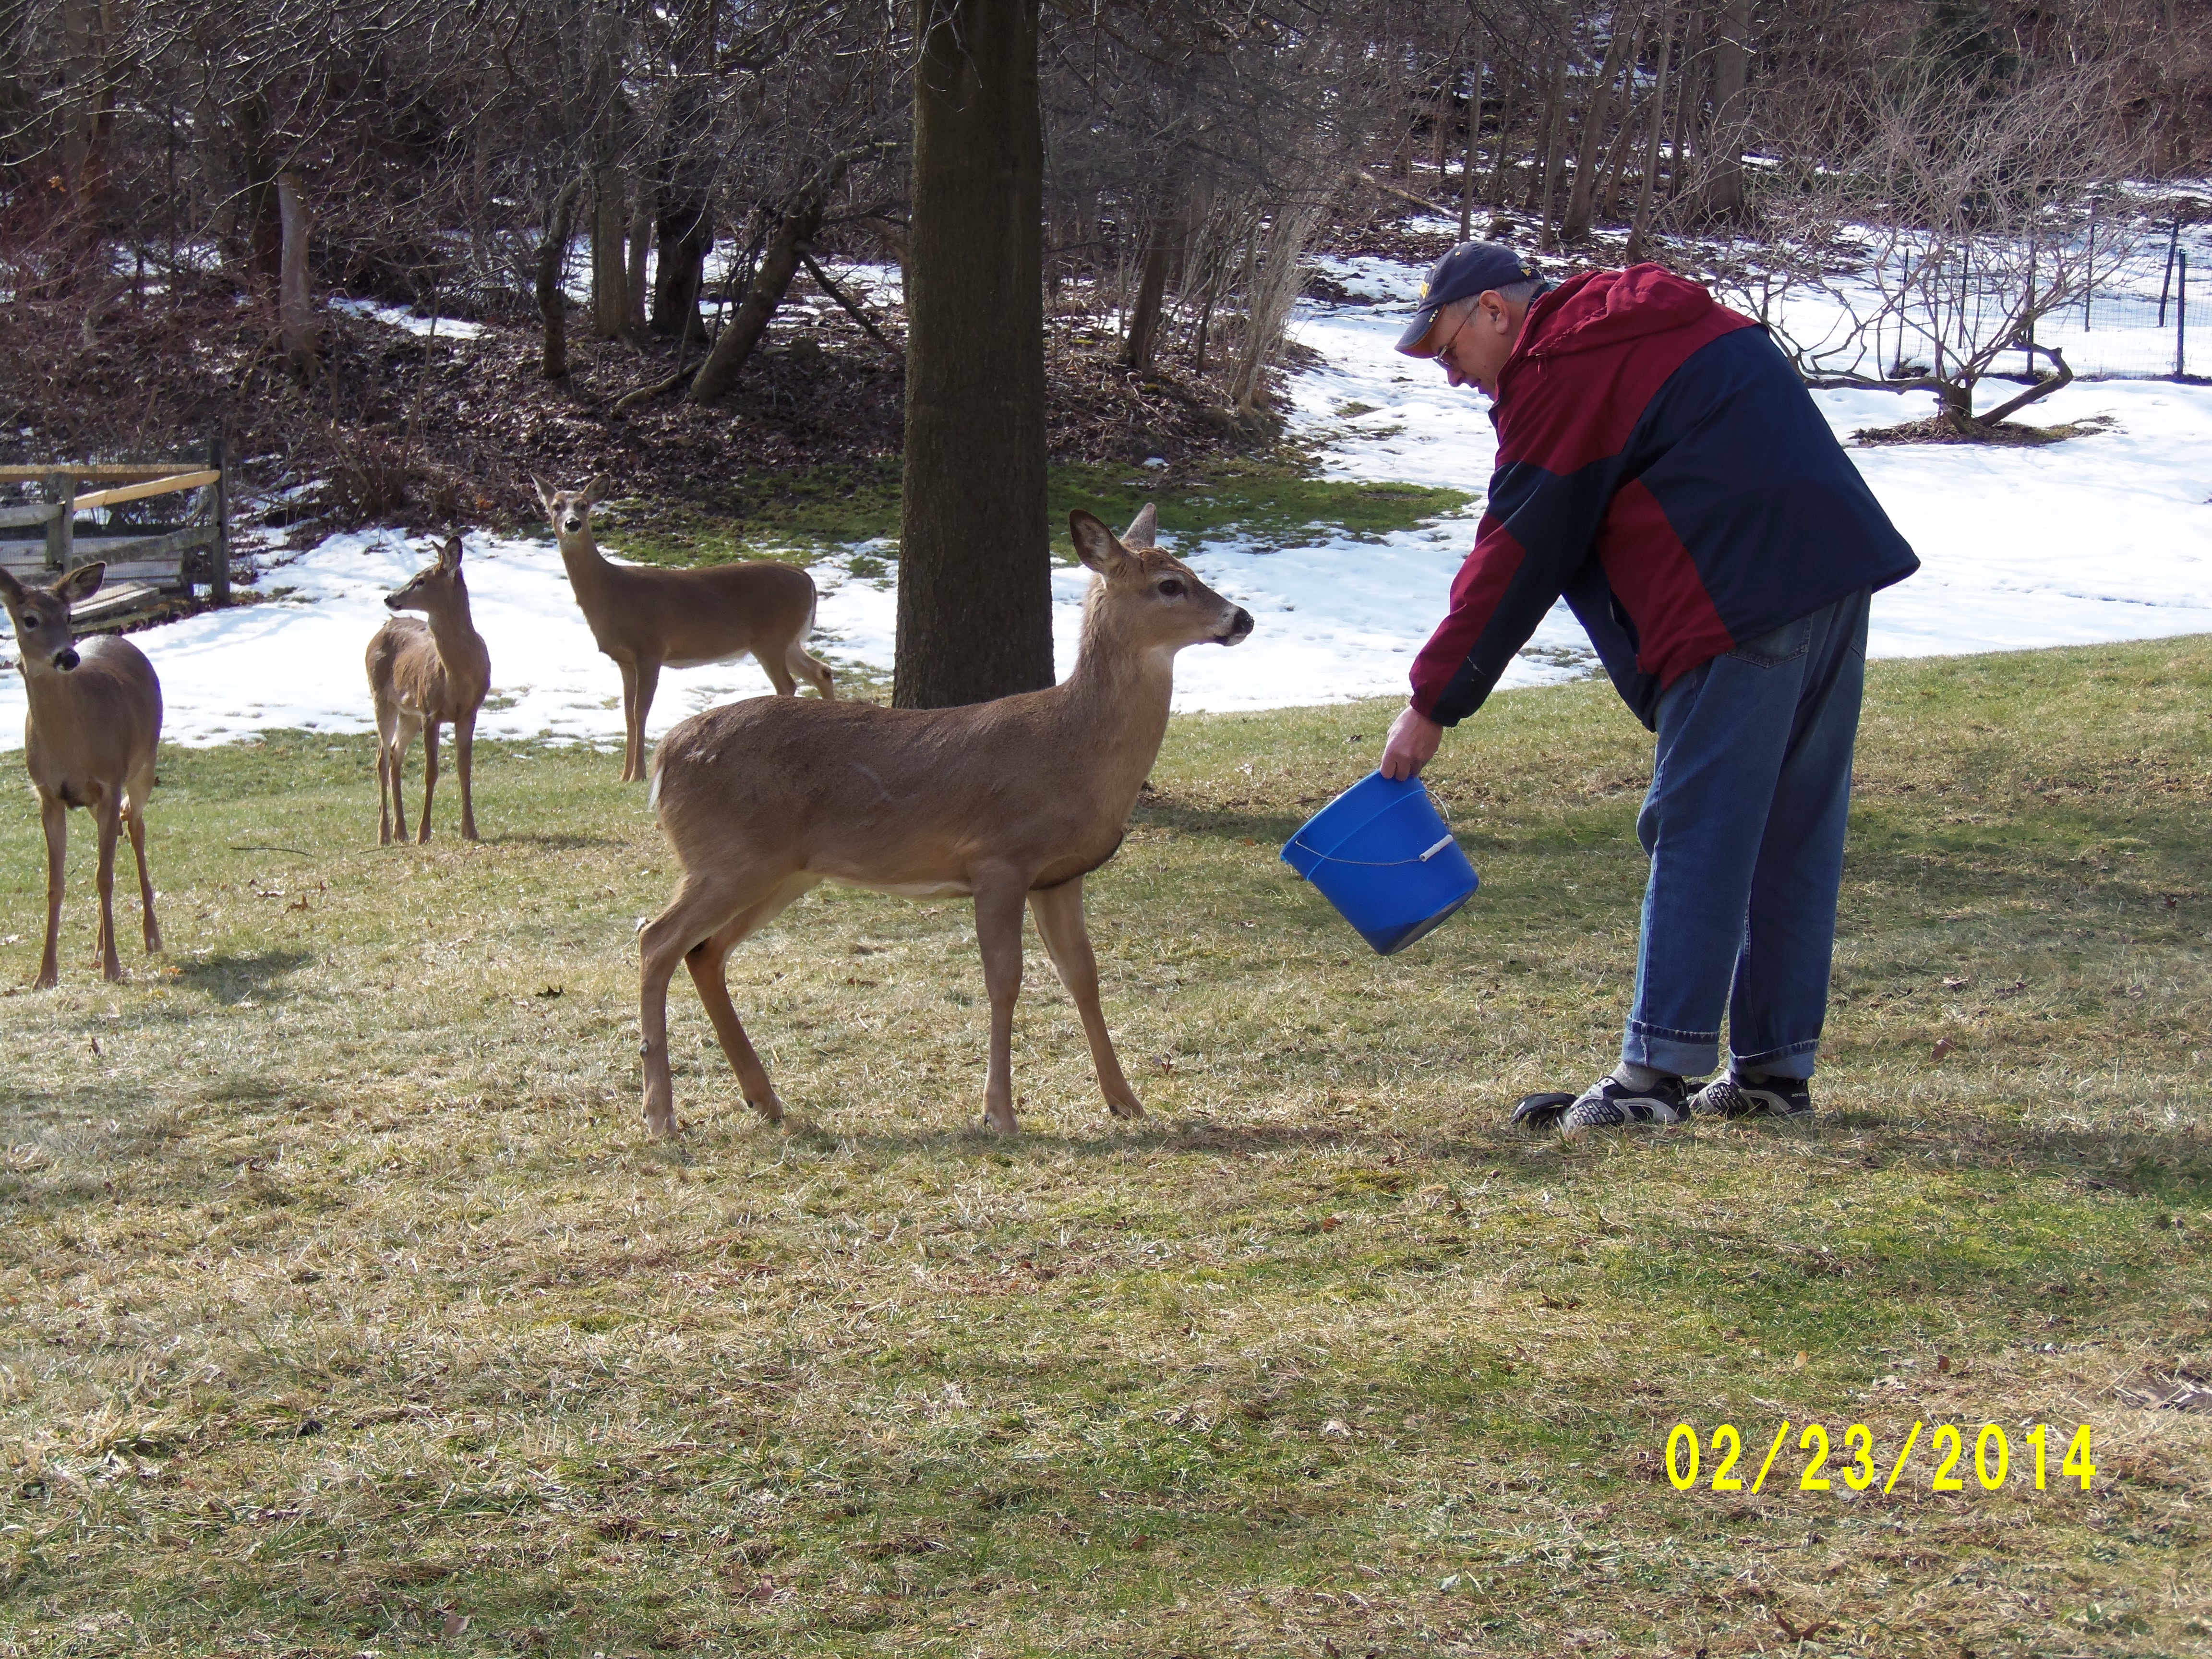 Pat loved the deer who frequently visited our yard!